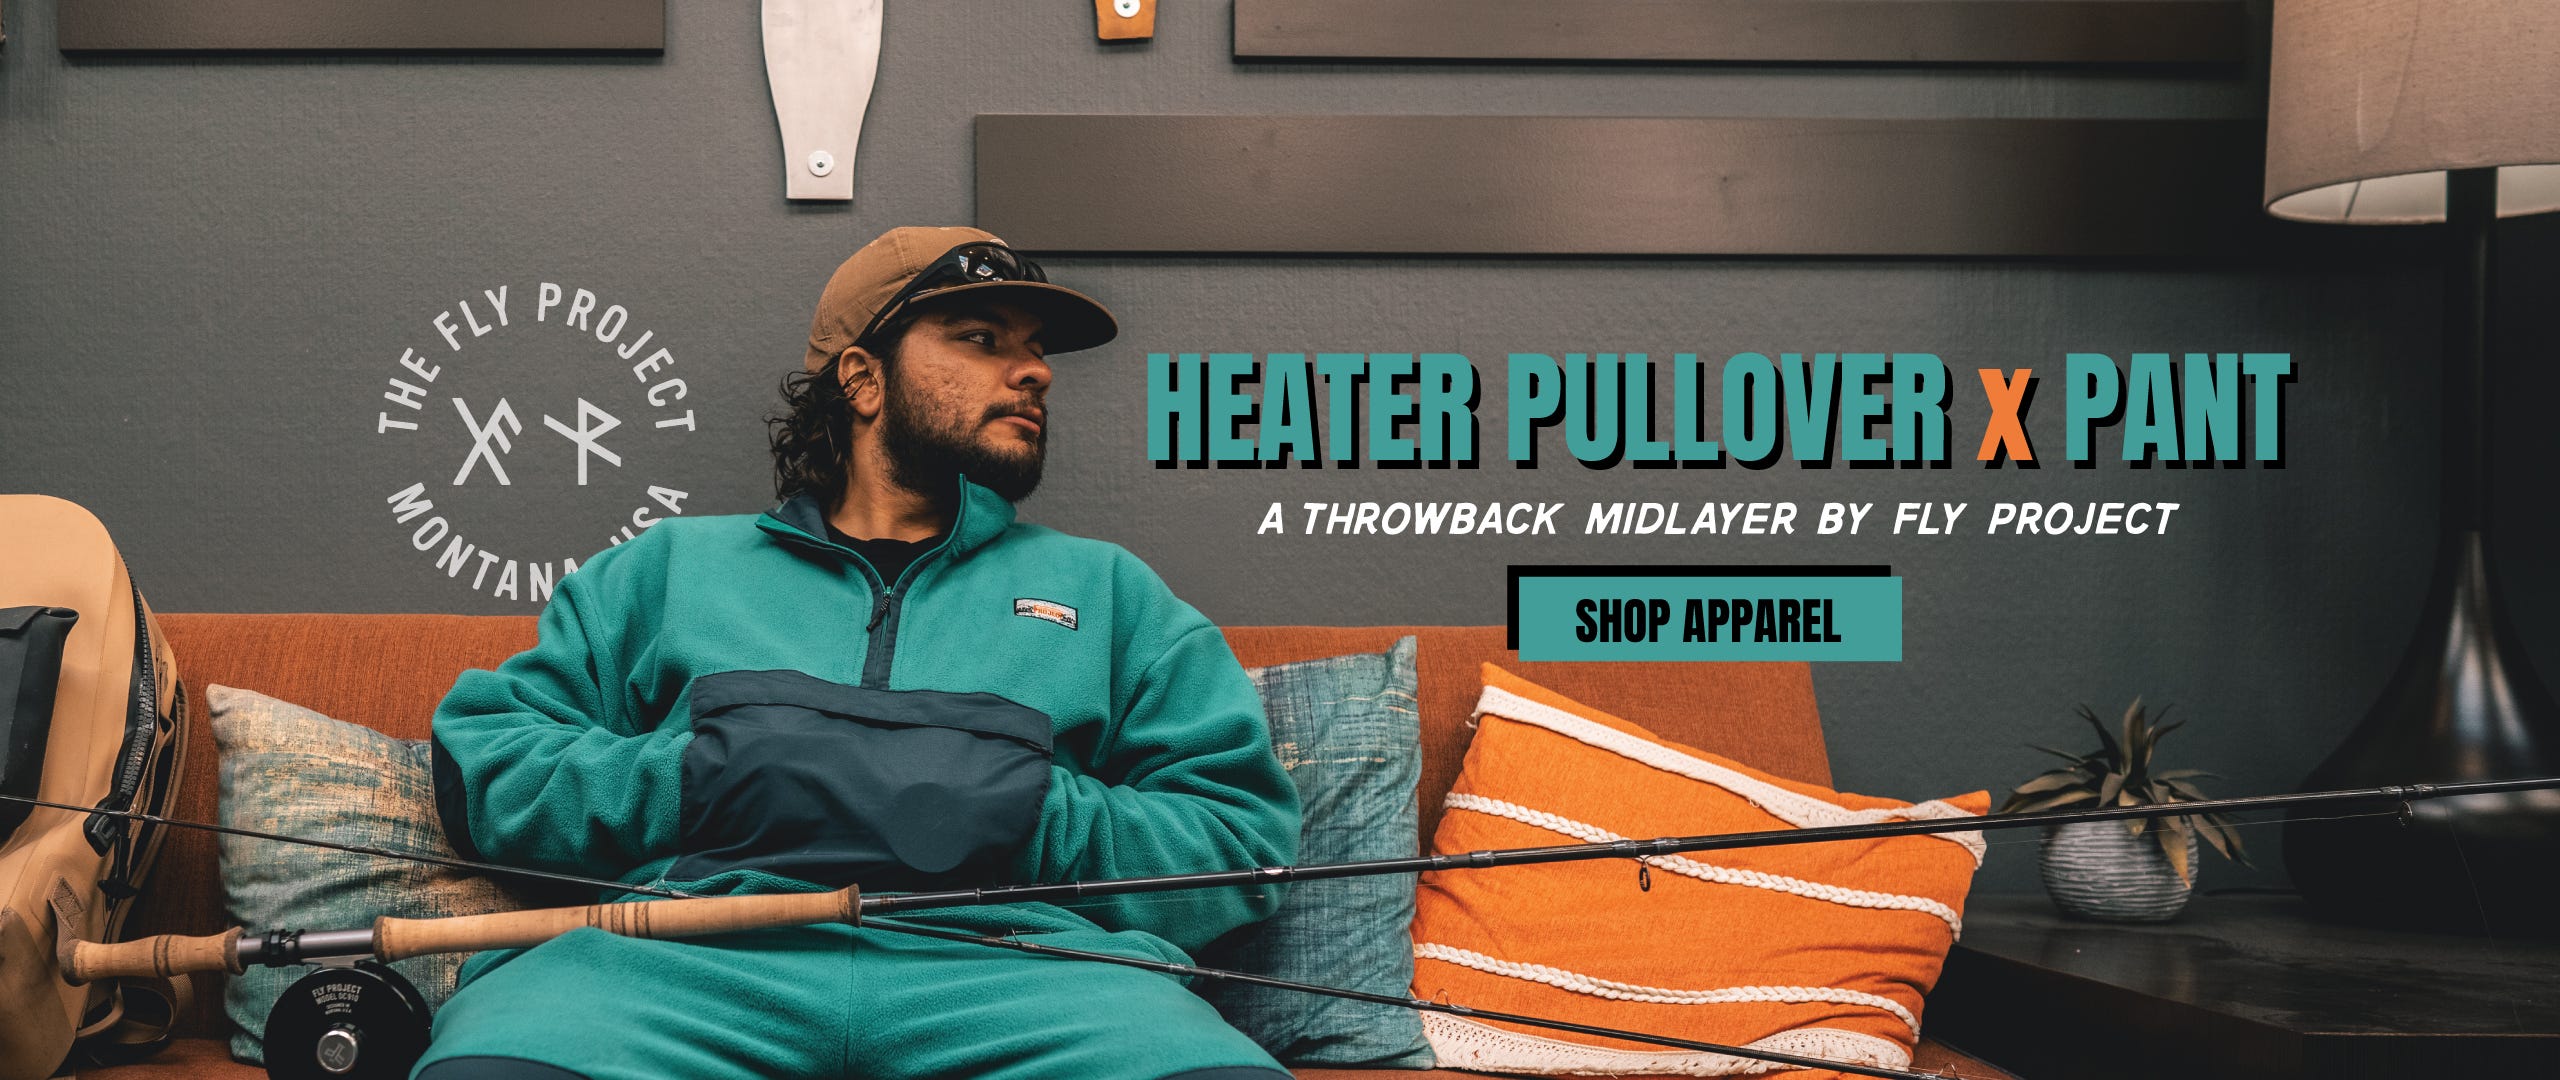 Introducing the Fly Project Heater Pullover and Pant, a throwback midlayer by Fly Project.